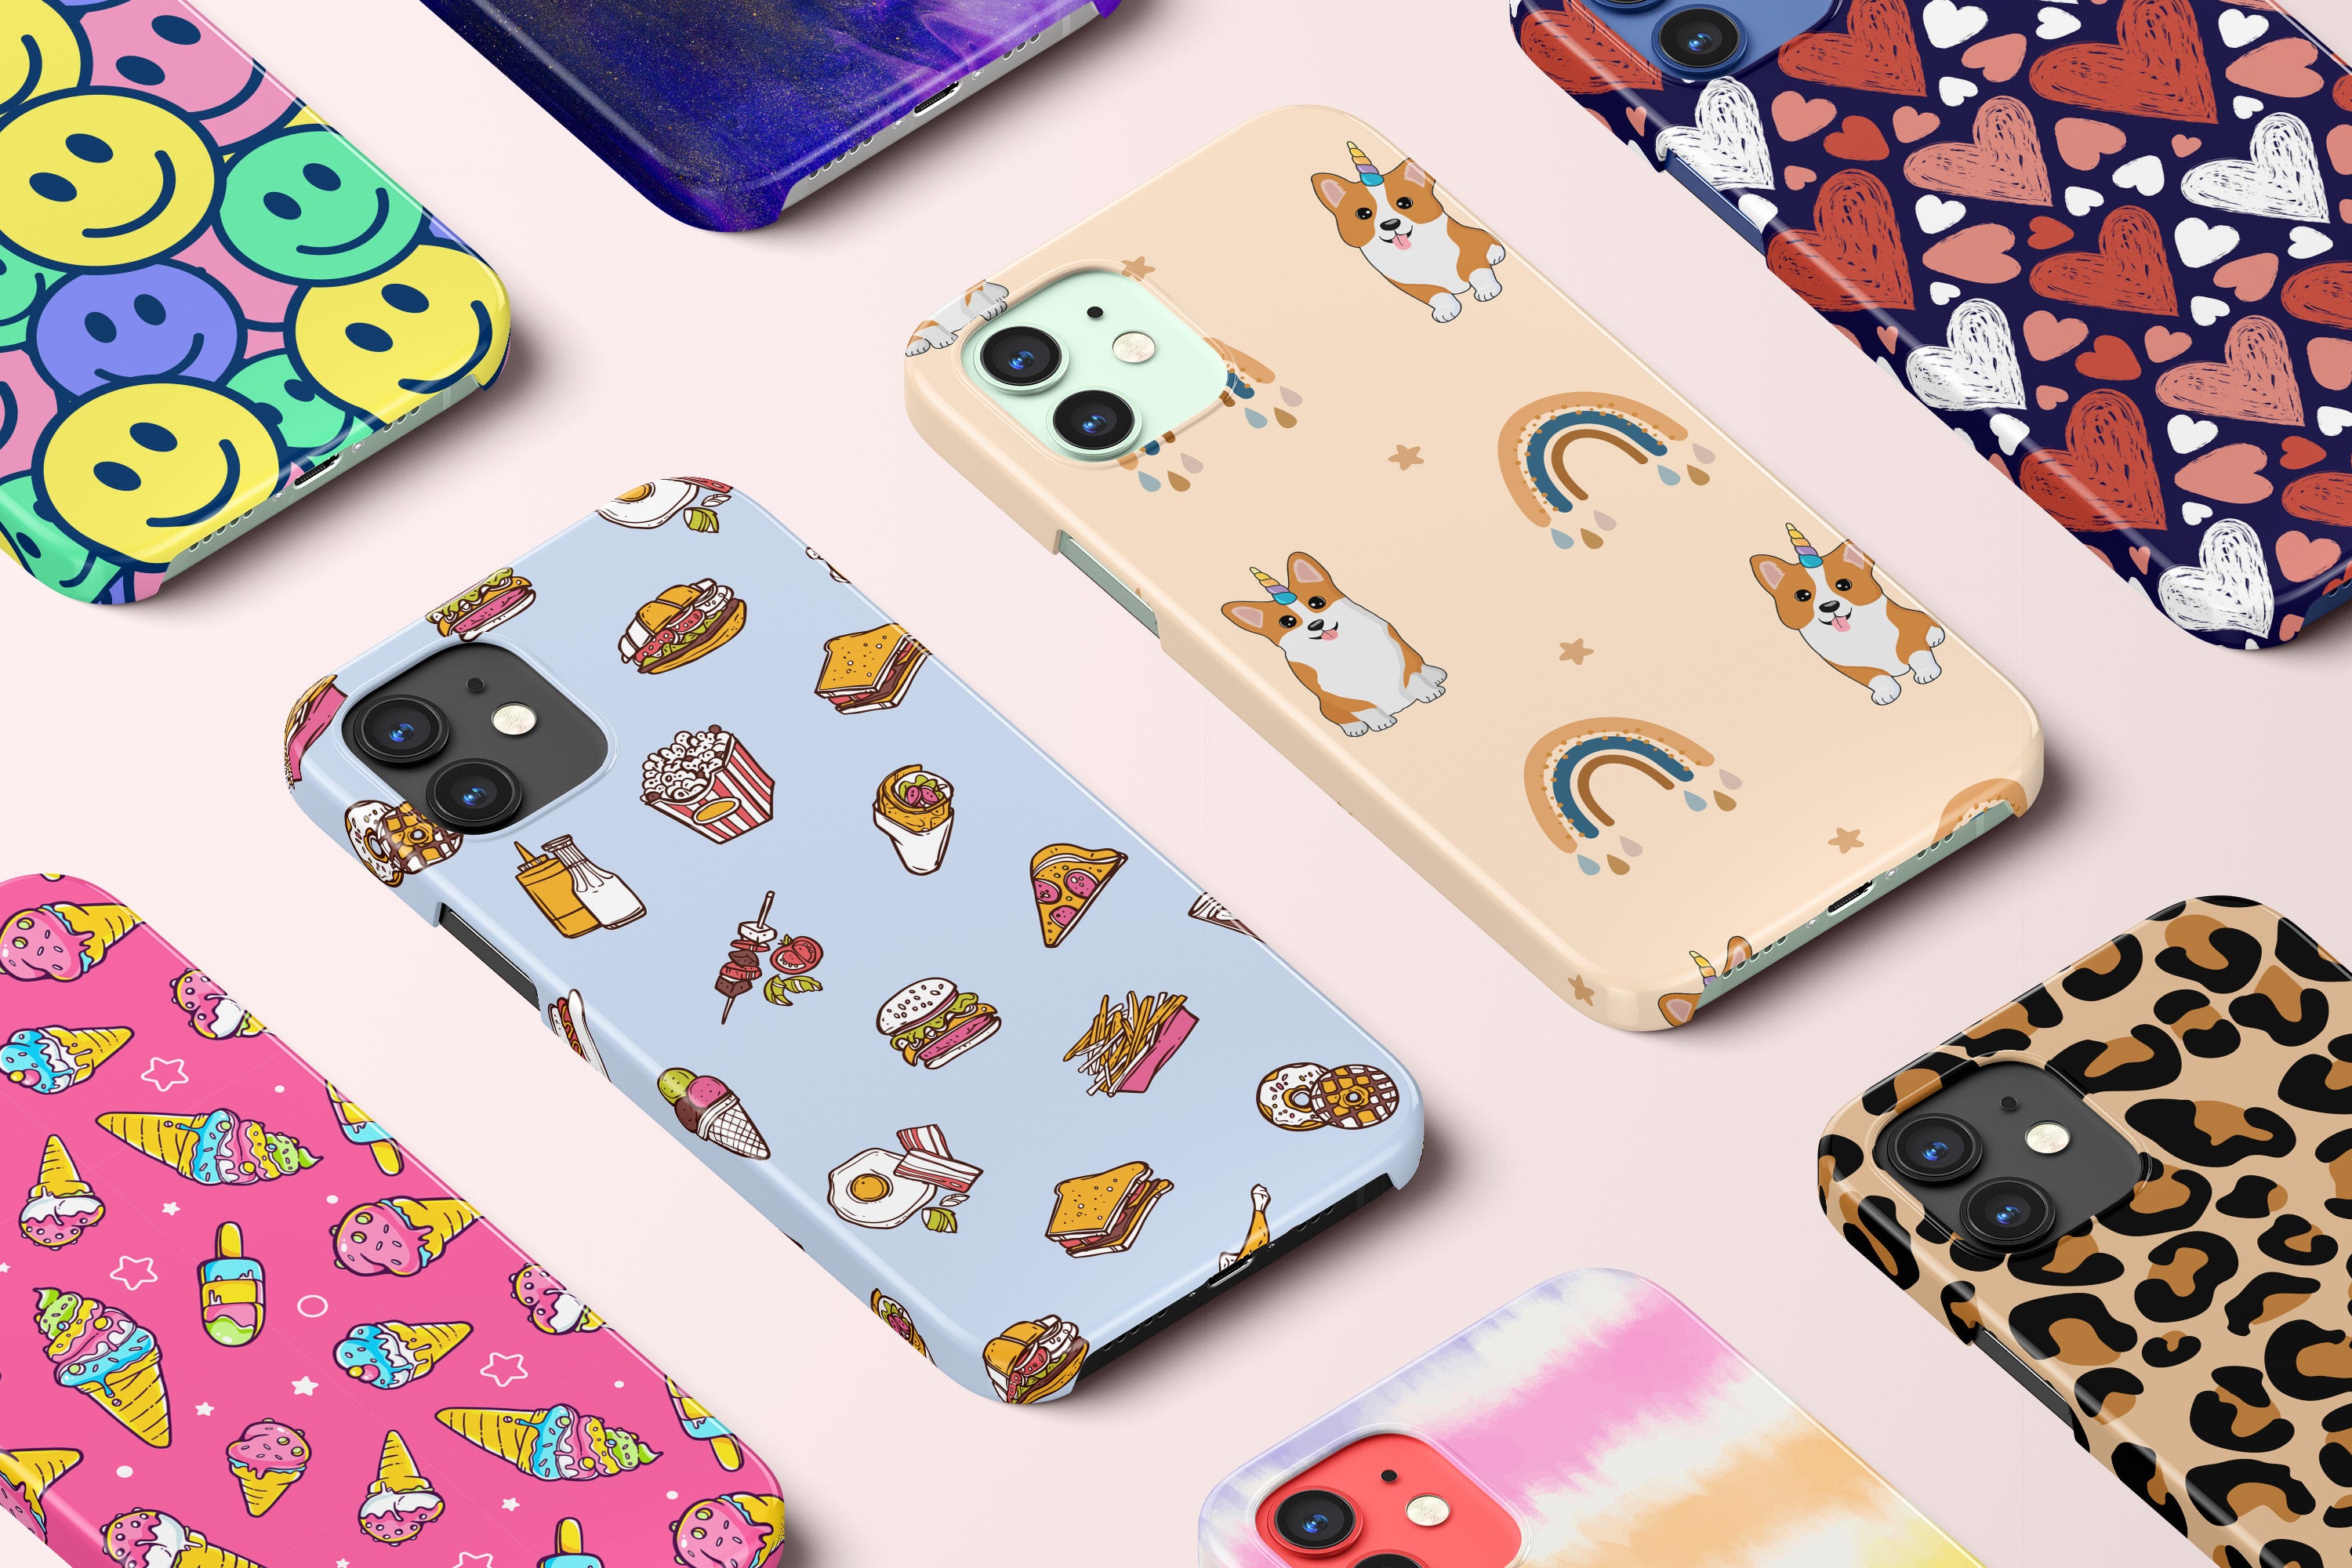 Collection of phones with cases showing many popular designs